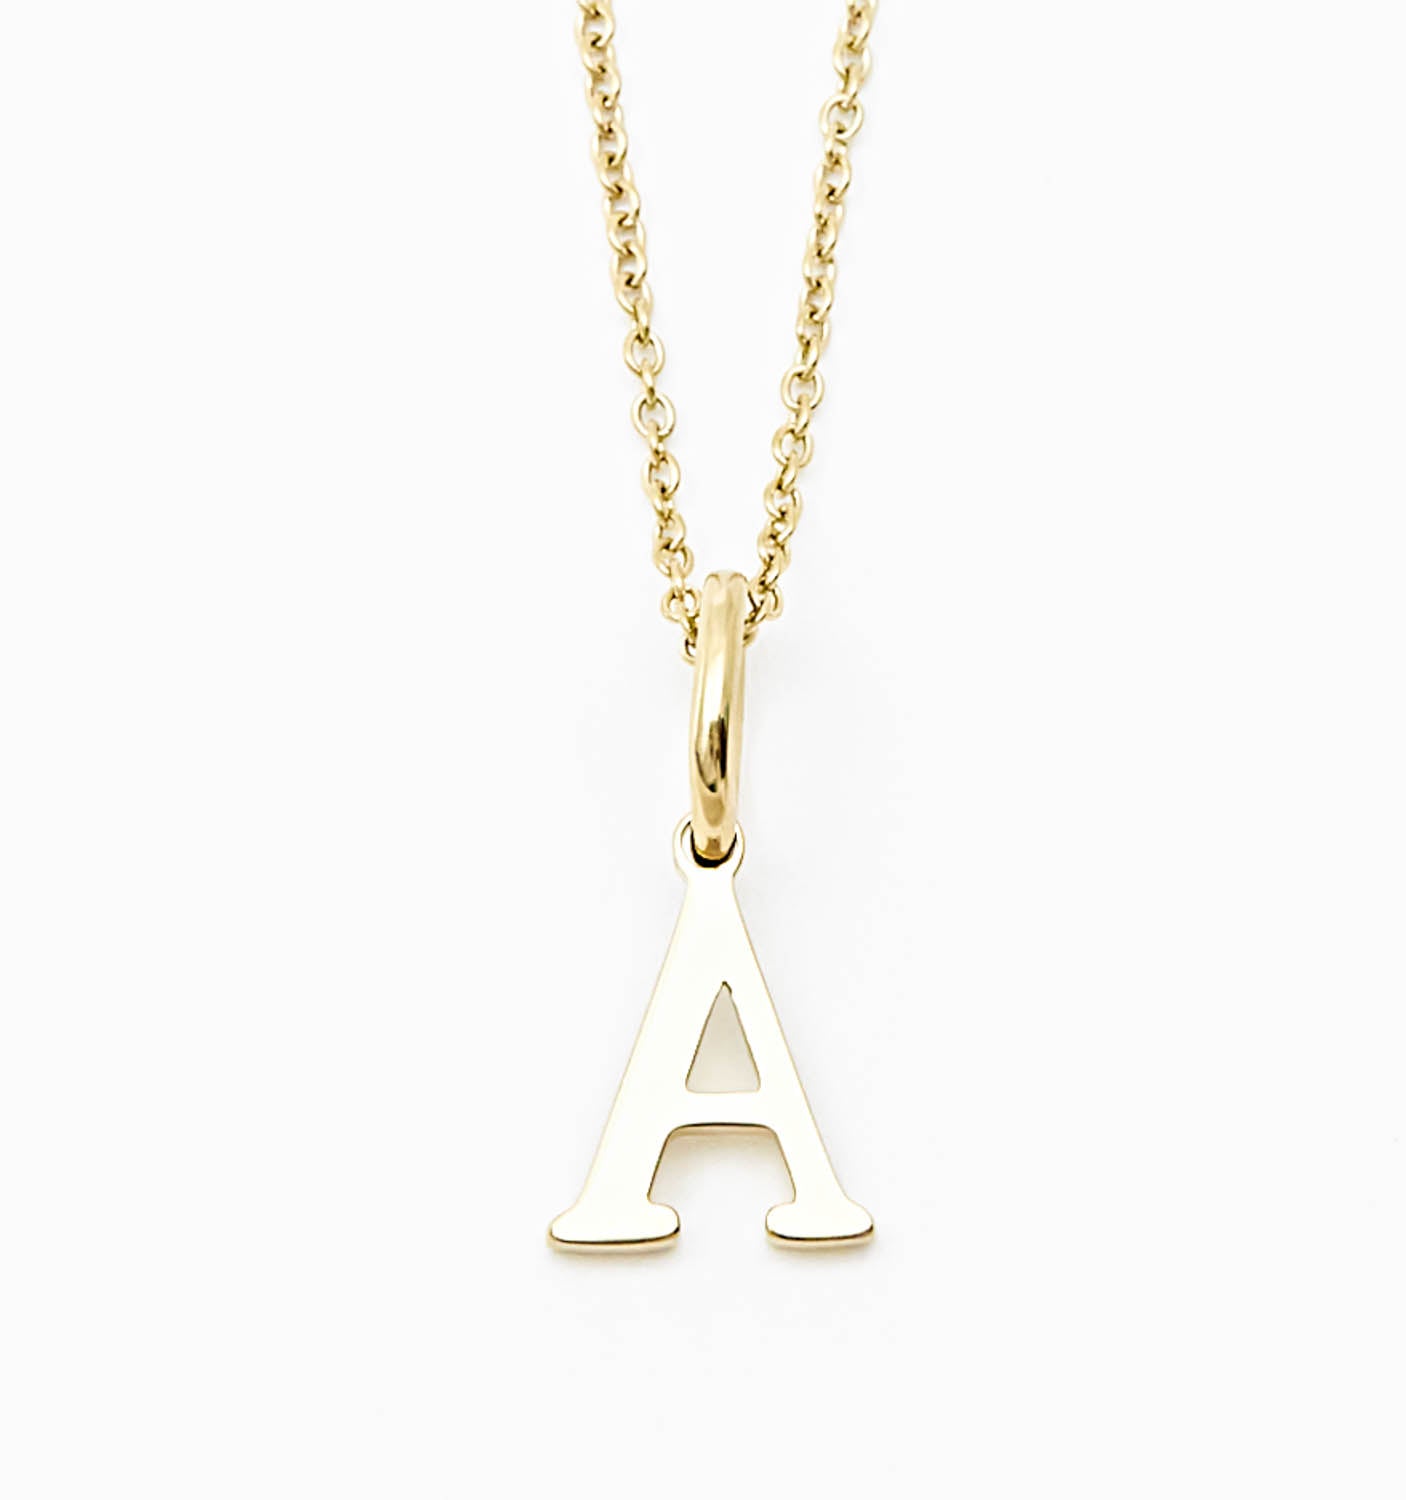 Diamonds and Gold Letter Necklaces - PDPAOLA